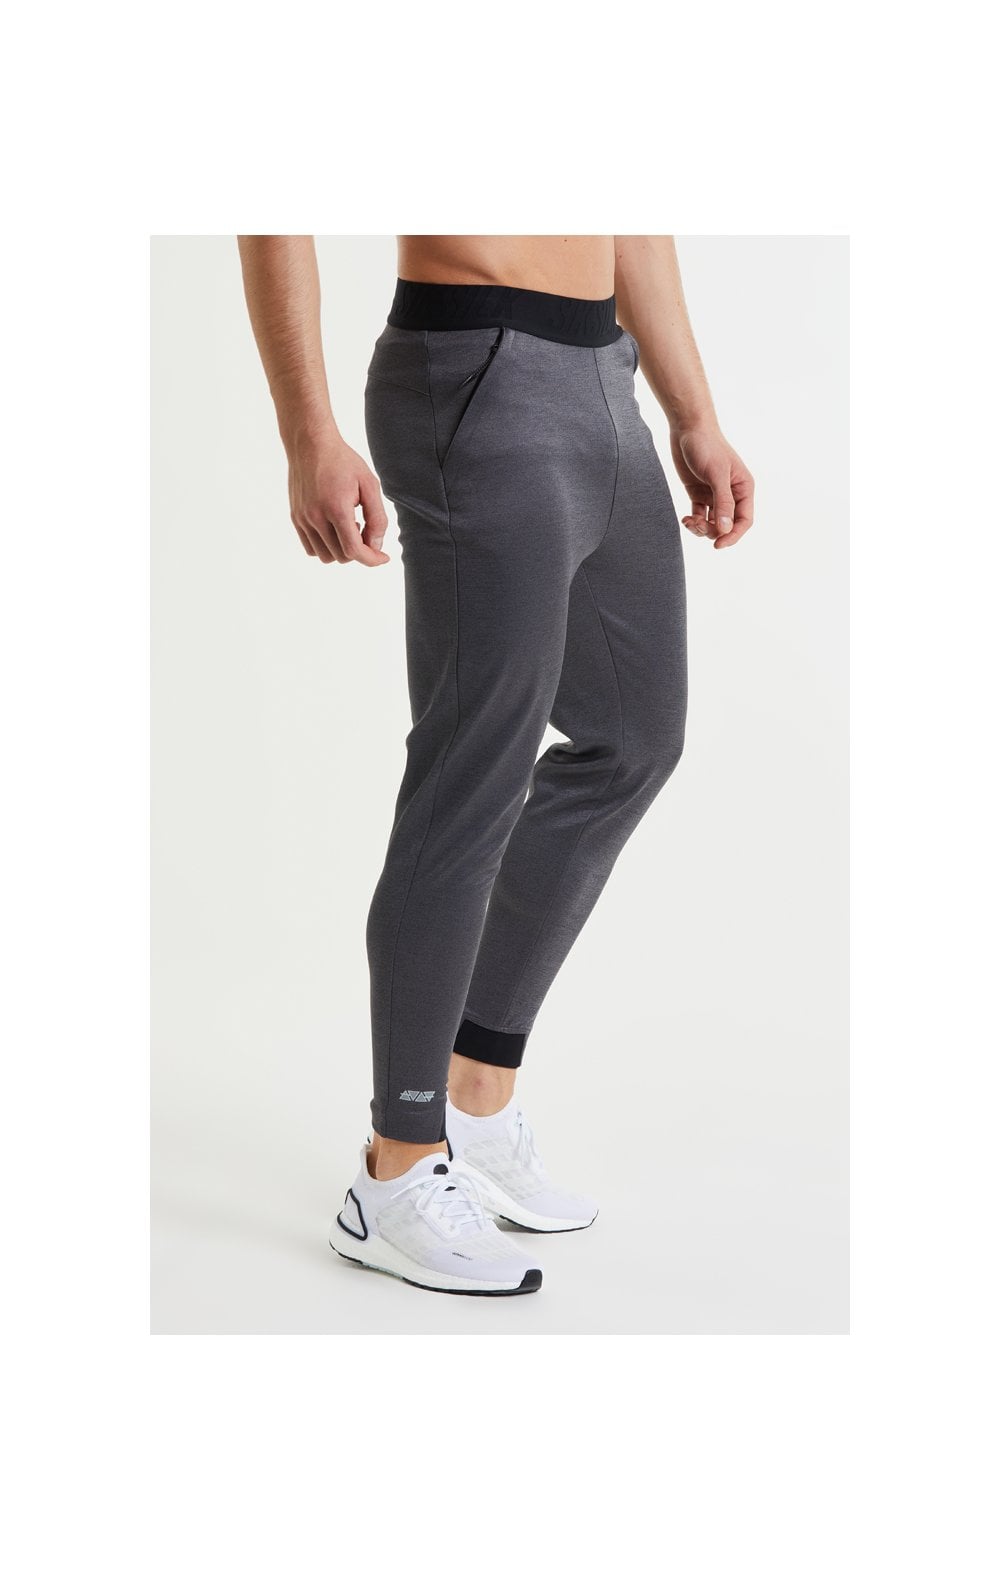 Load image into Gallery viewer, SikSilk Rapid Pants – Charcoal Marl (2)